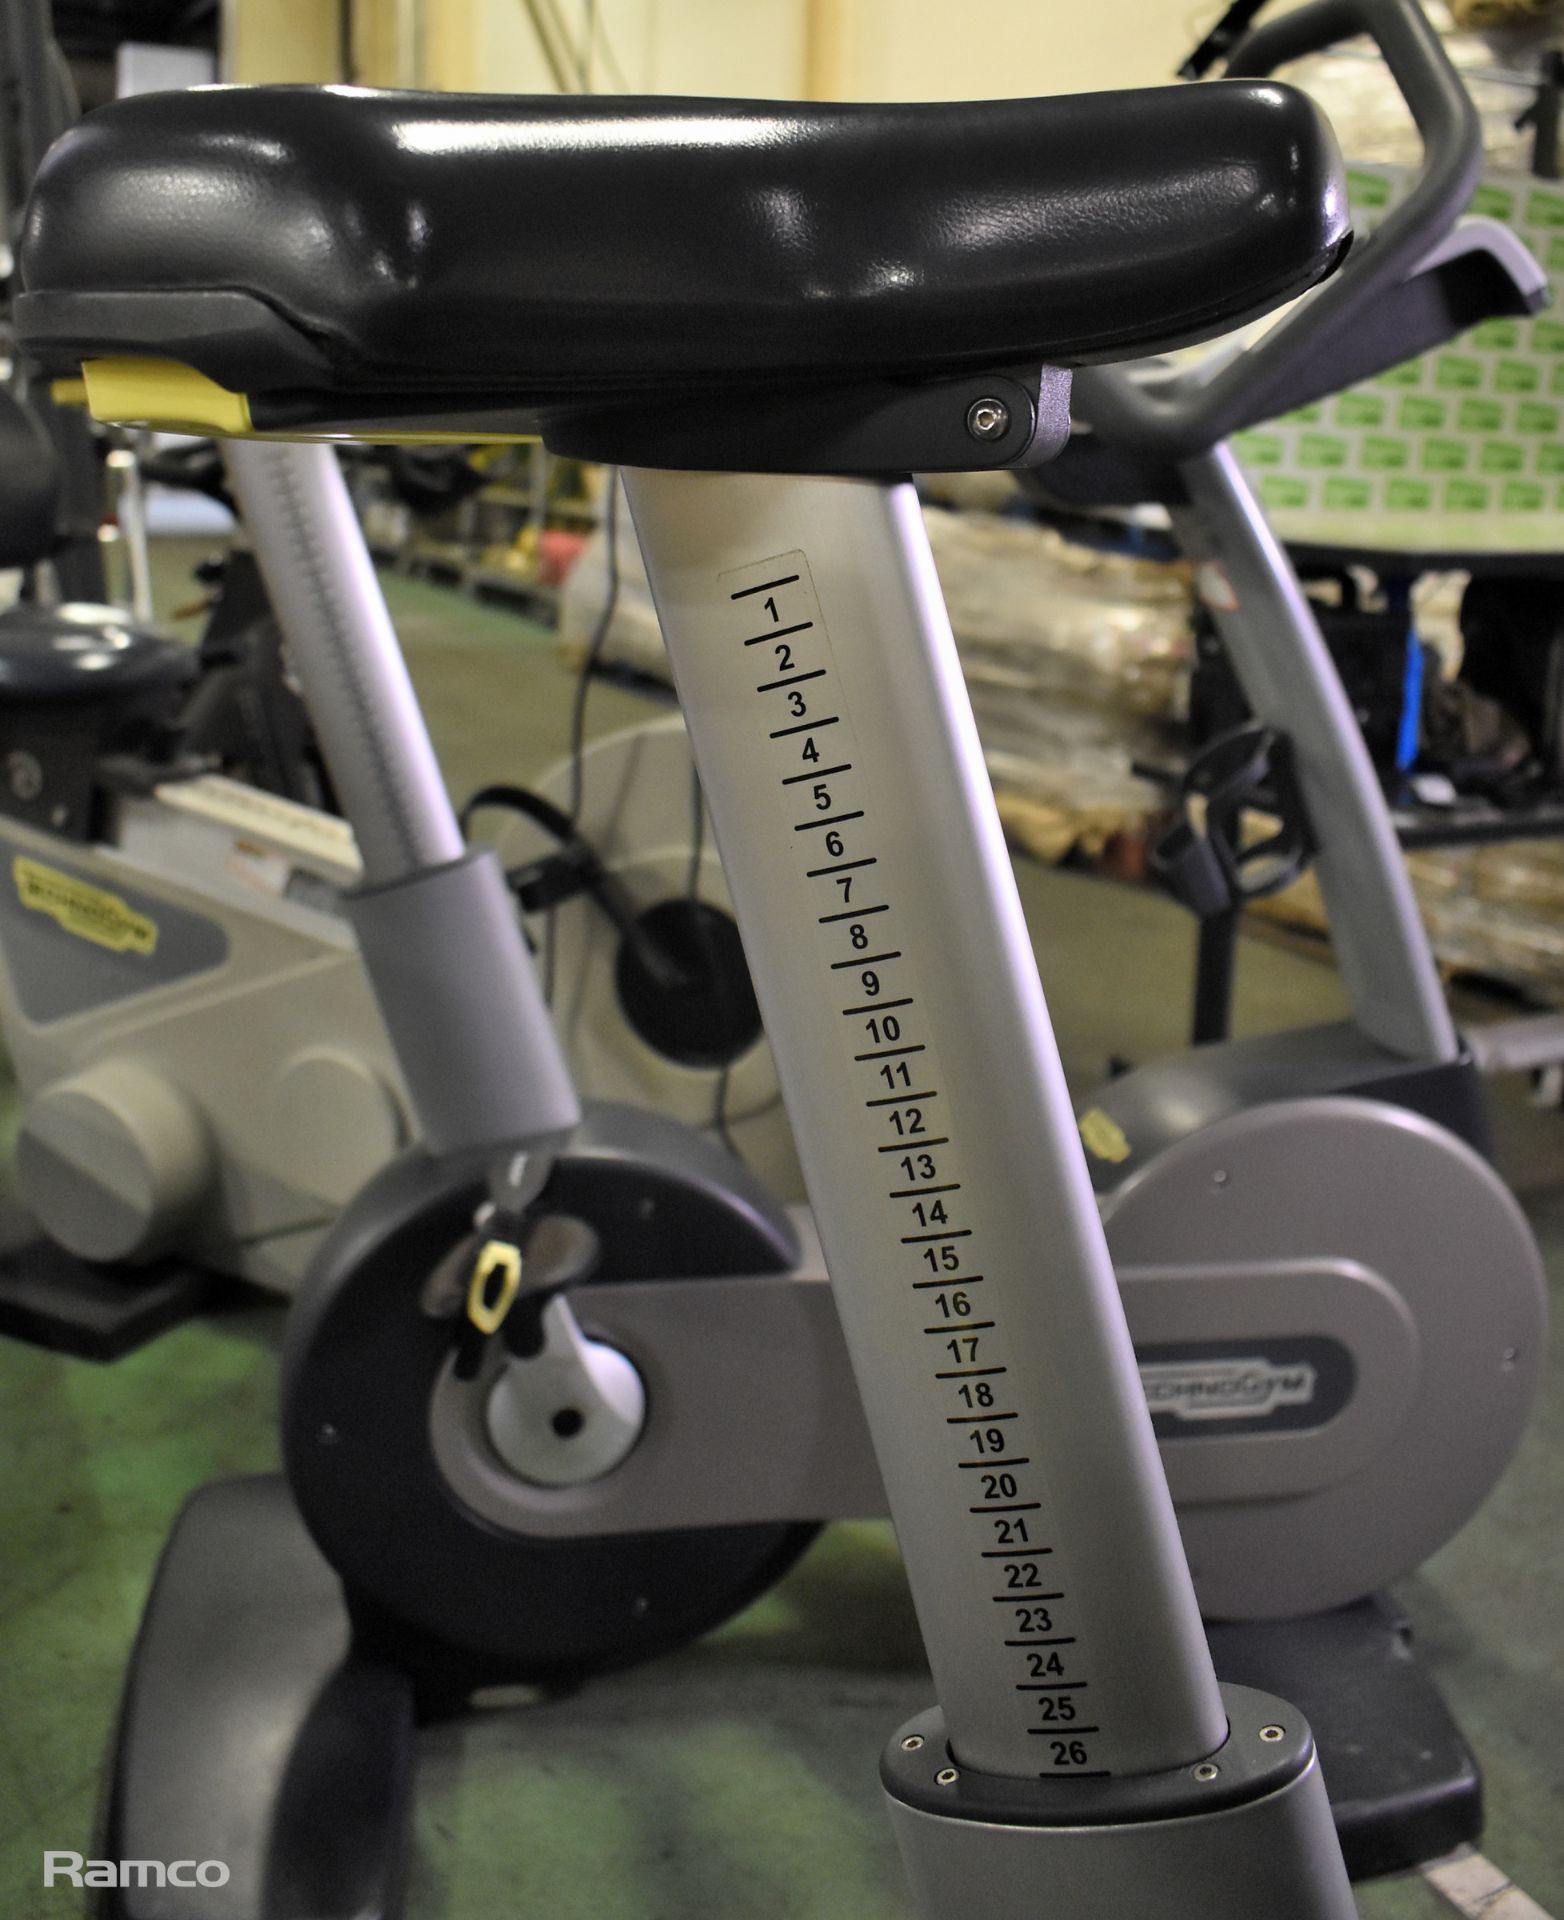 TechnoGym static exercise bike - W 550 x D 1210 x H 1380mm - Image 5 of 7